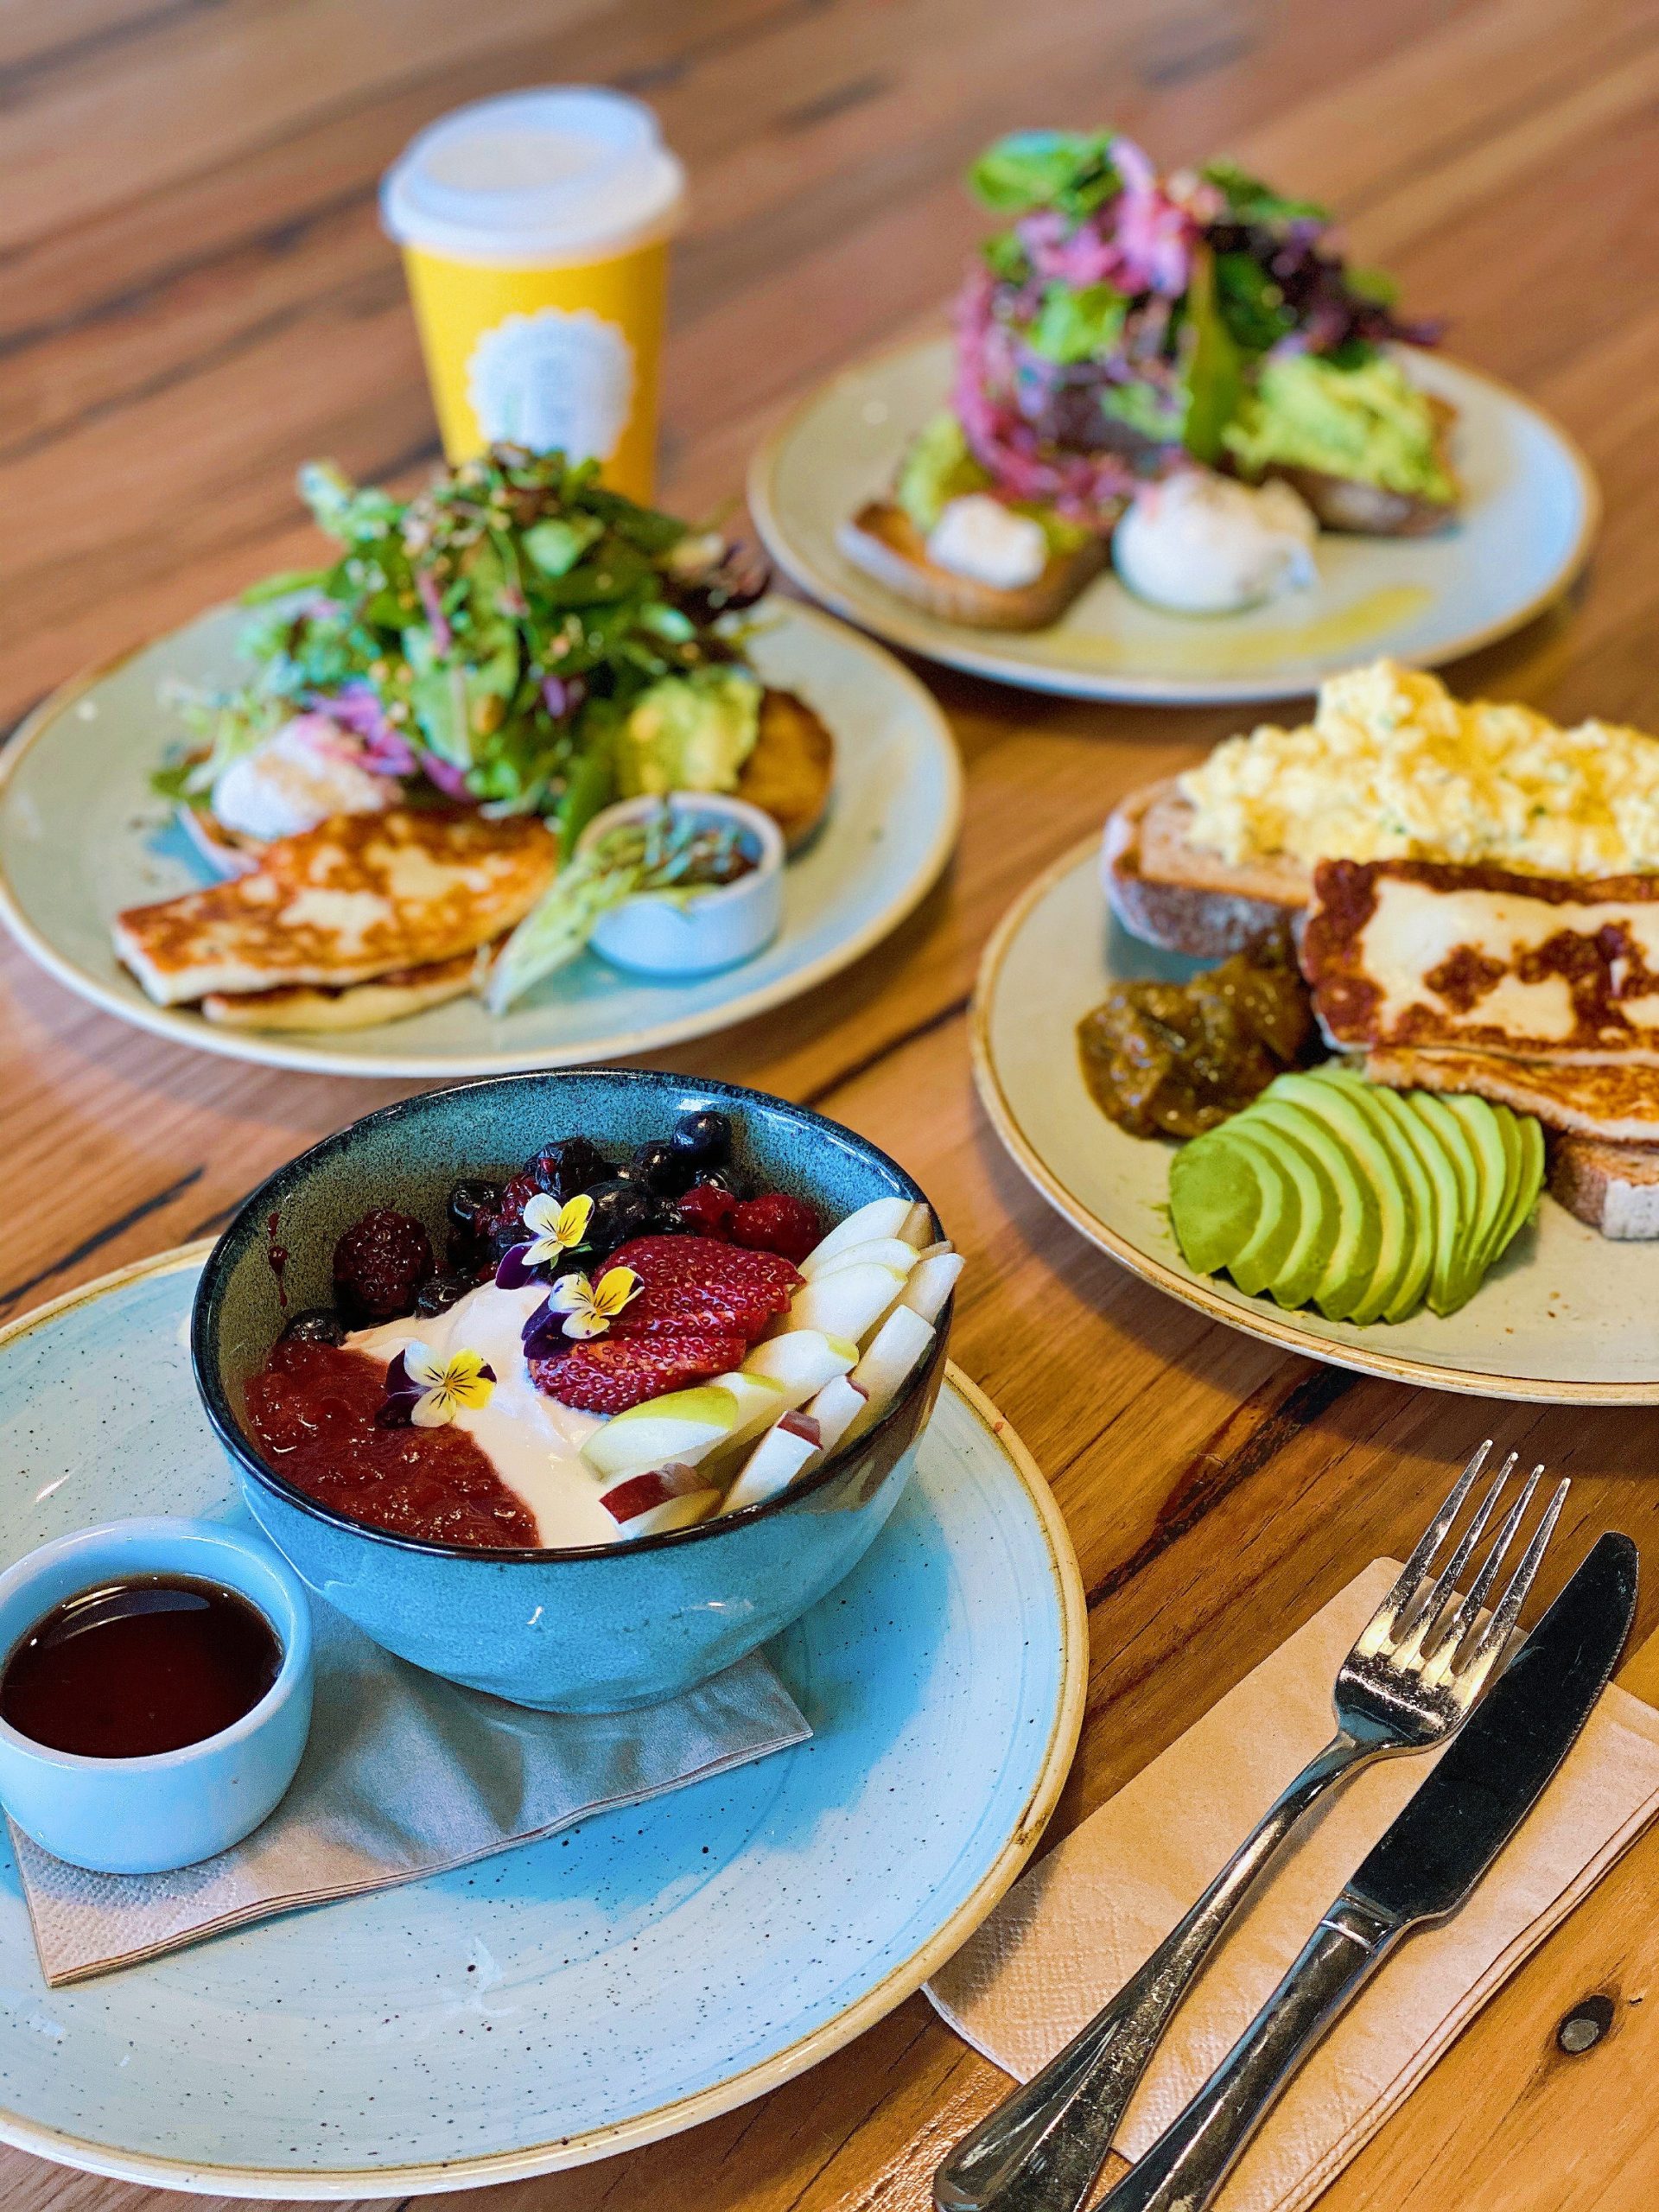 WIN brunch for four people at Pickle in the Middle!